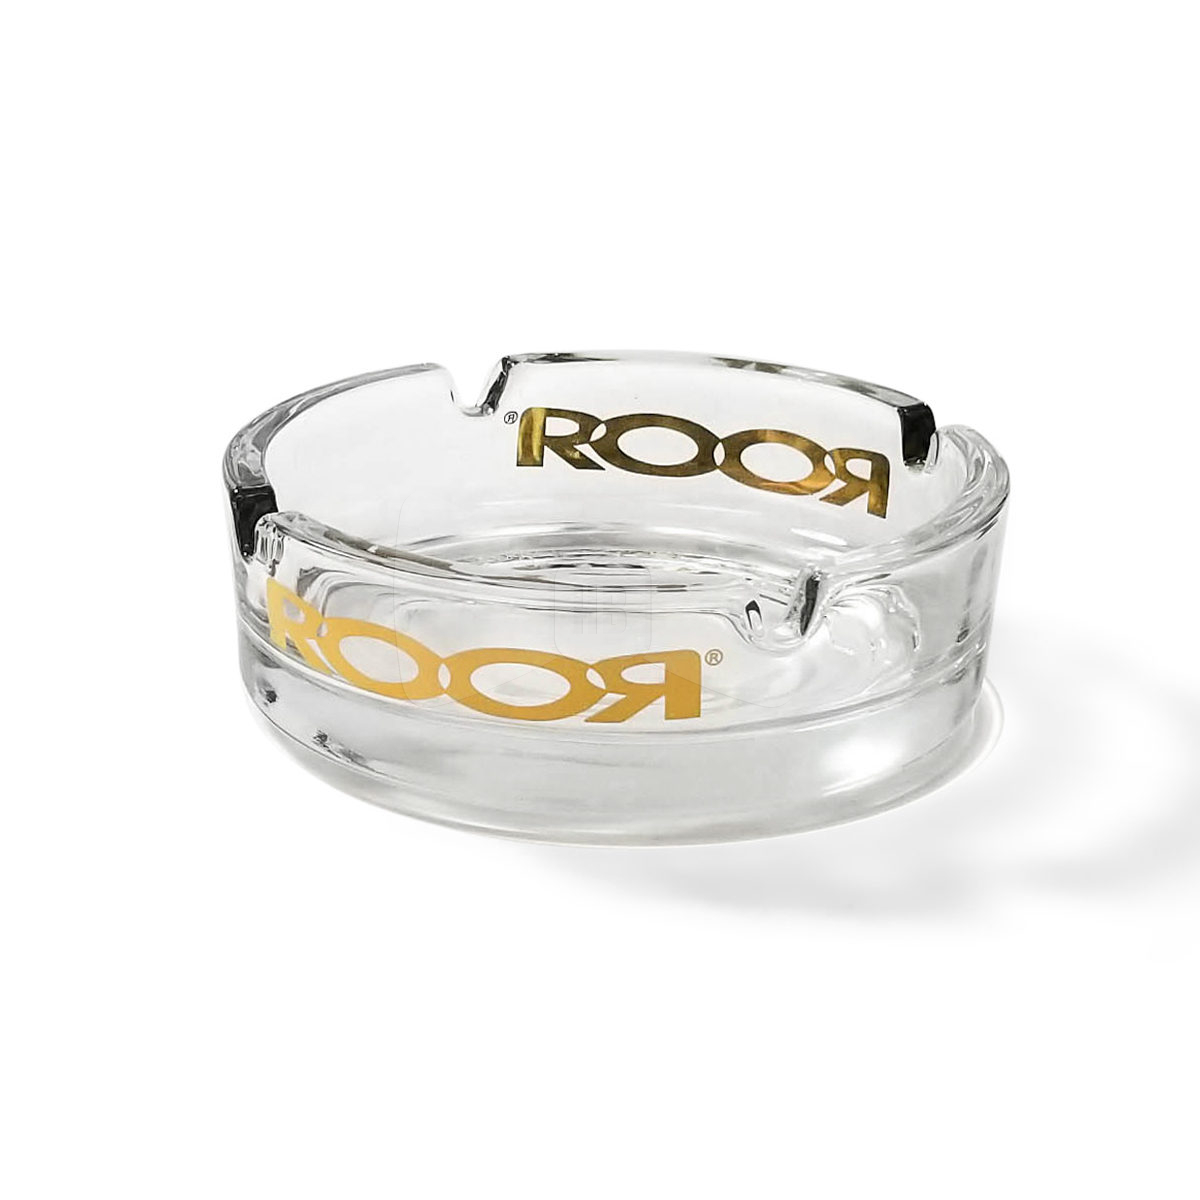 Roor Glass Ashtray Gold